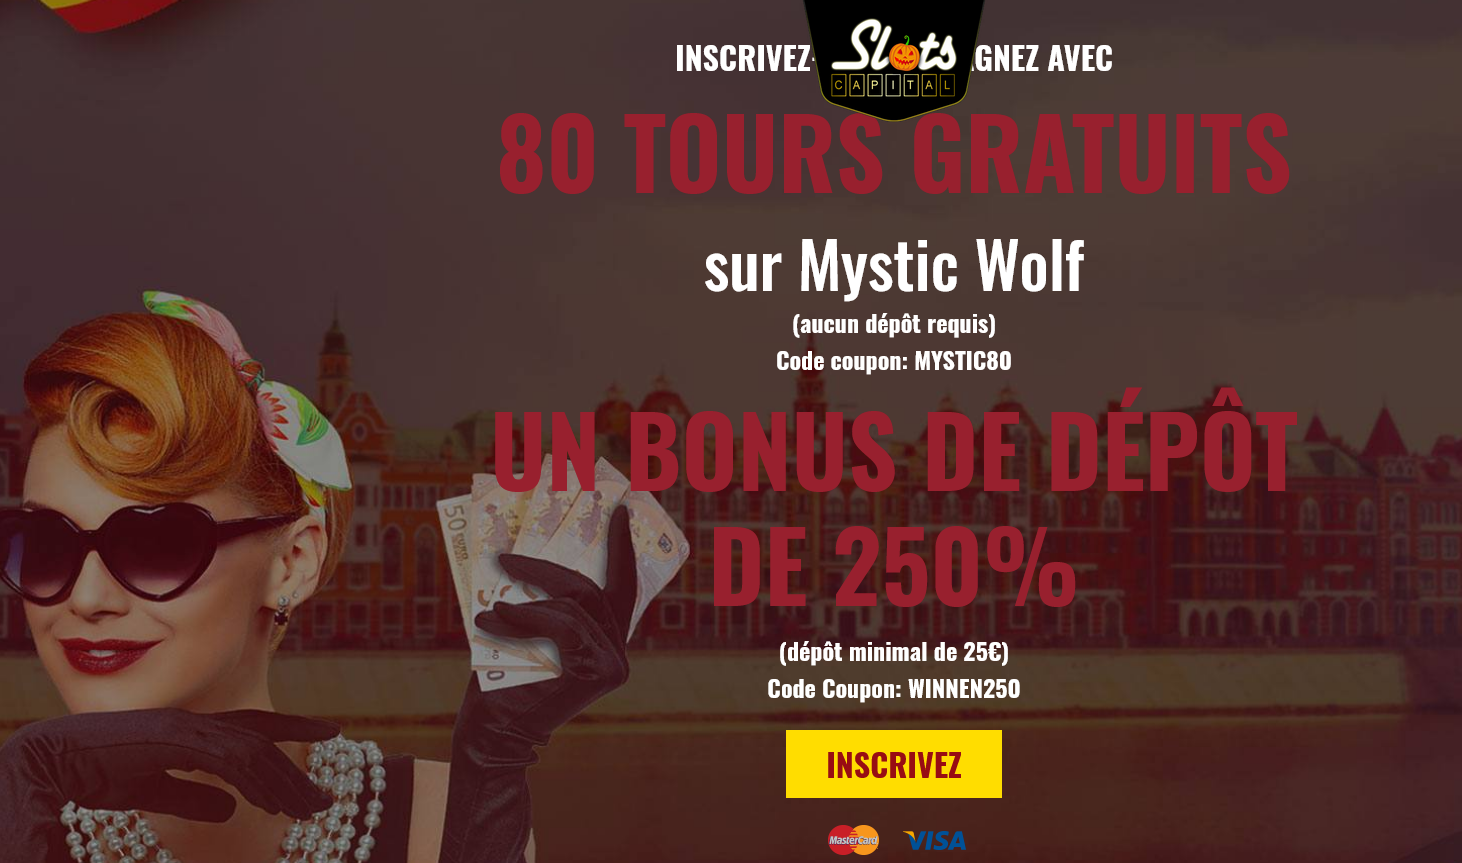 Slots
                                                          Capital 80
                                                          Free Spins
                                                          French